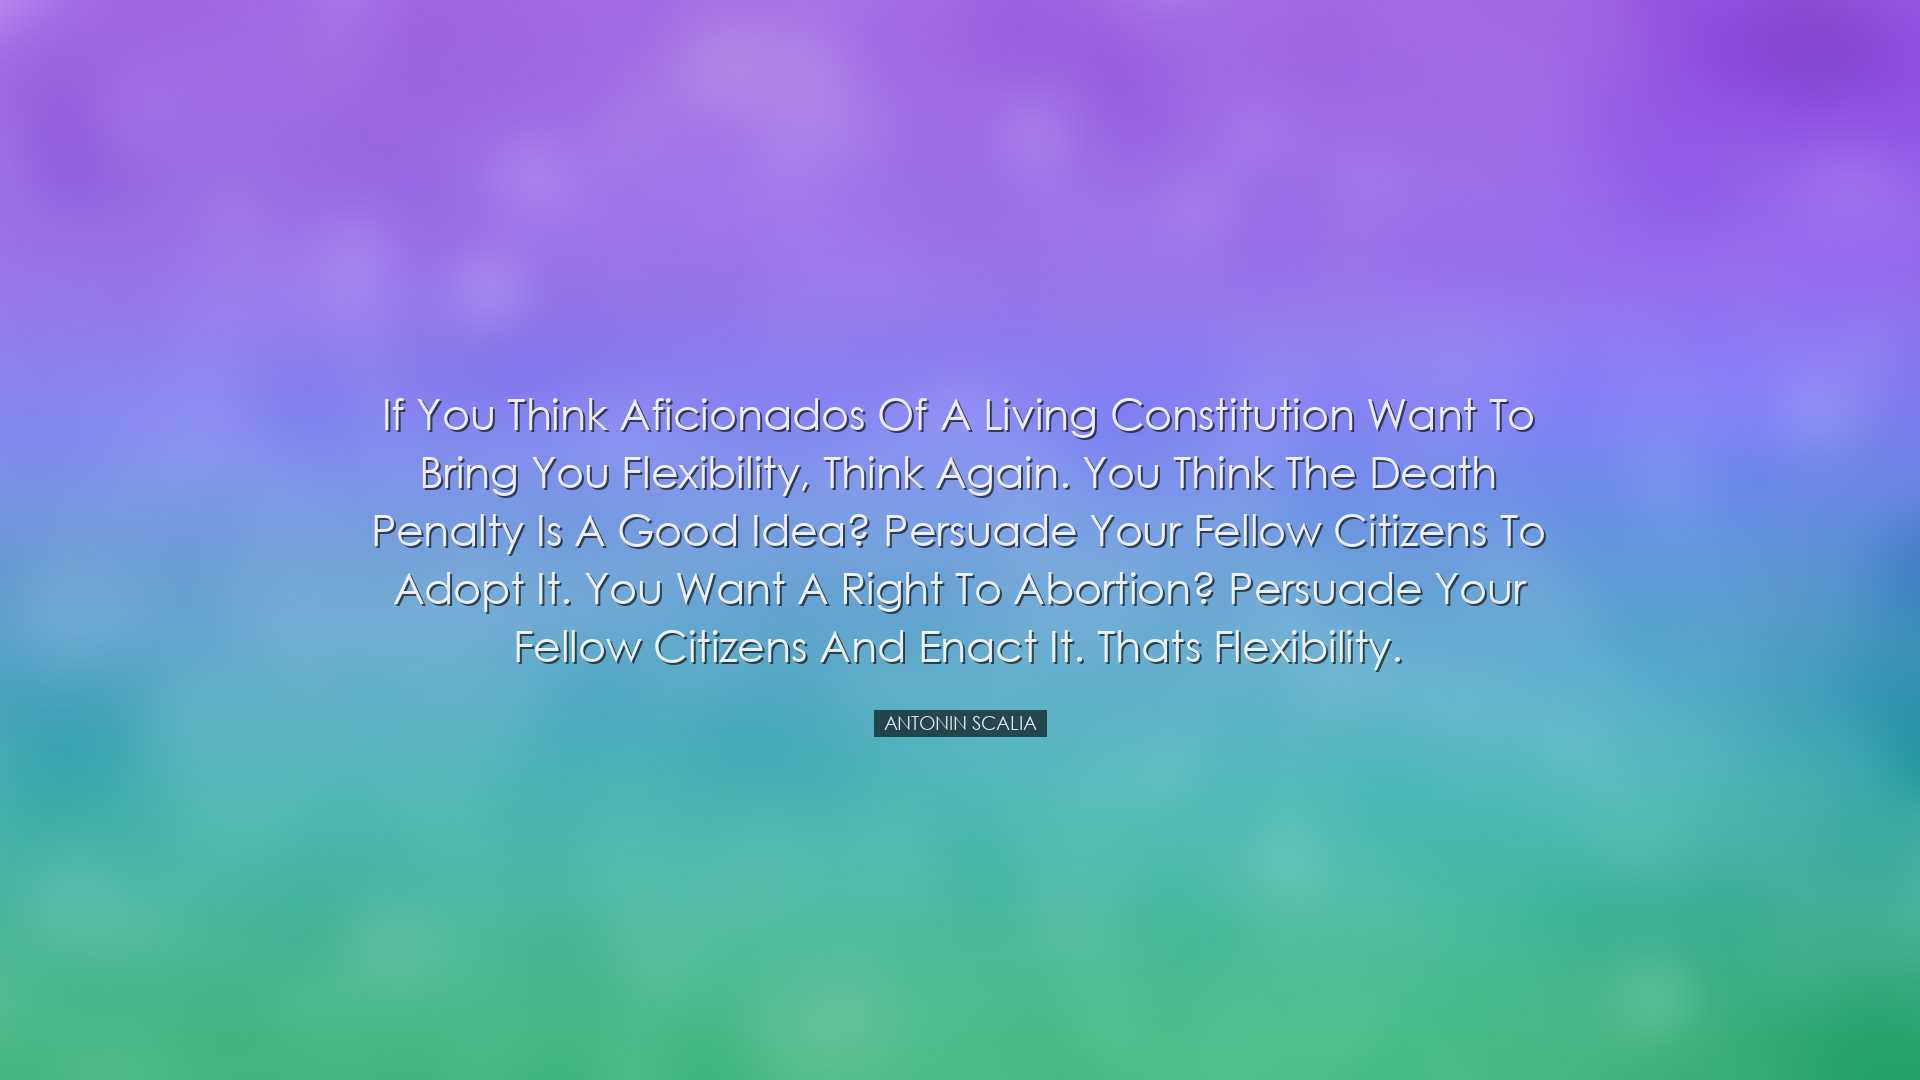 If you think aficionados of a living Constitution want to bring yo